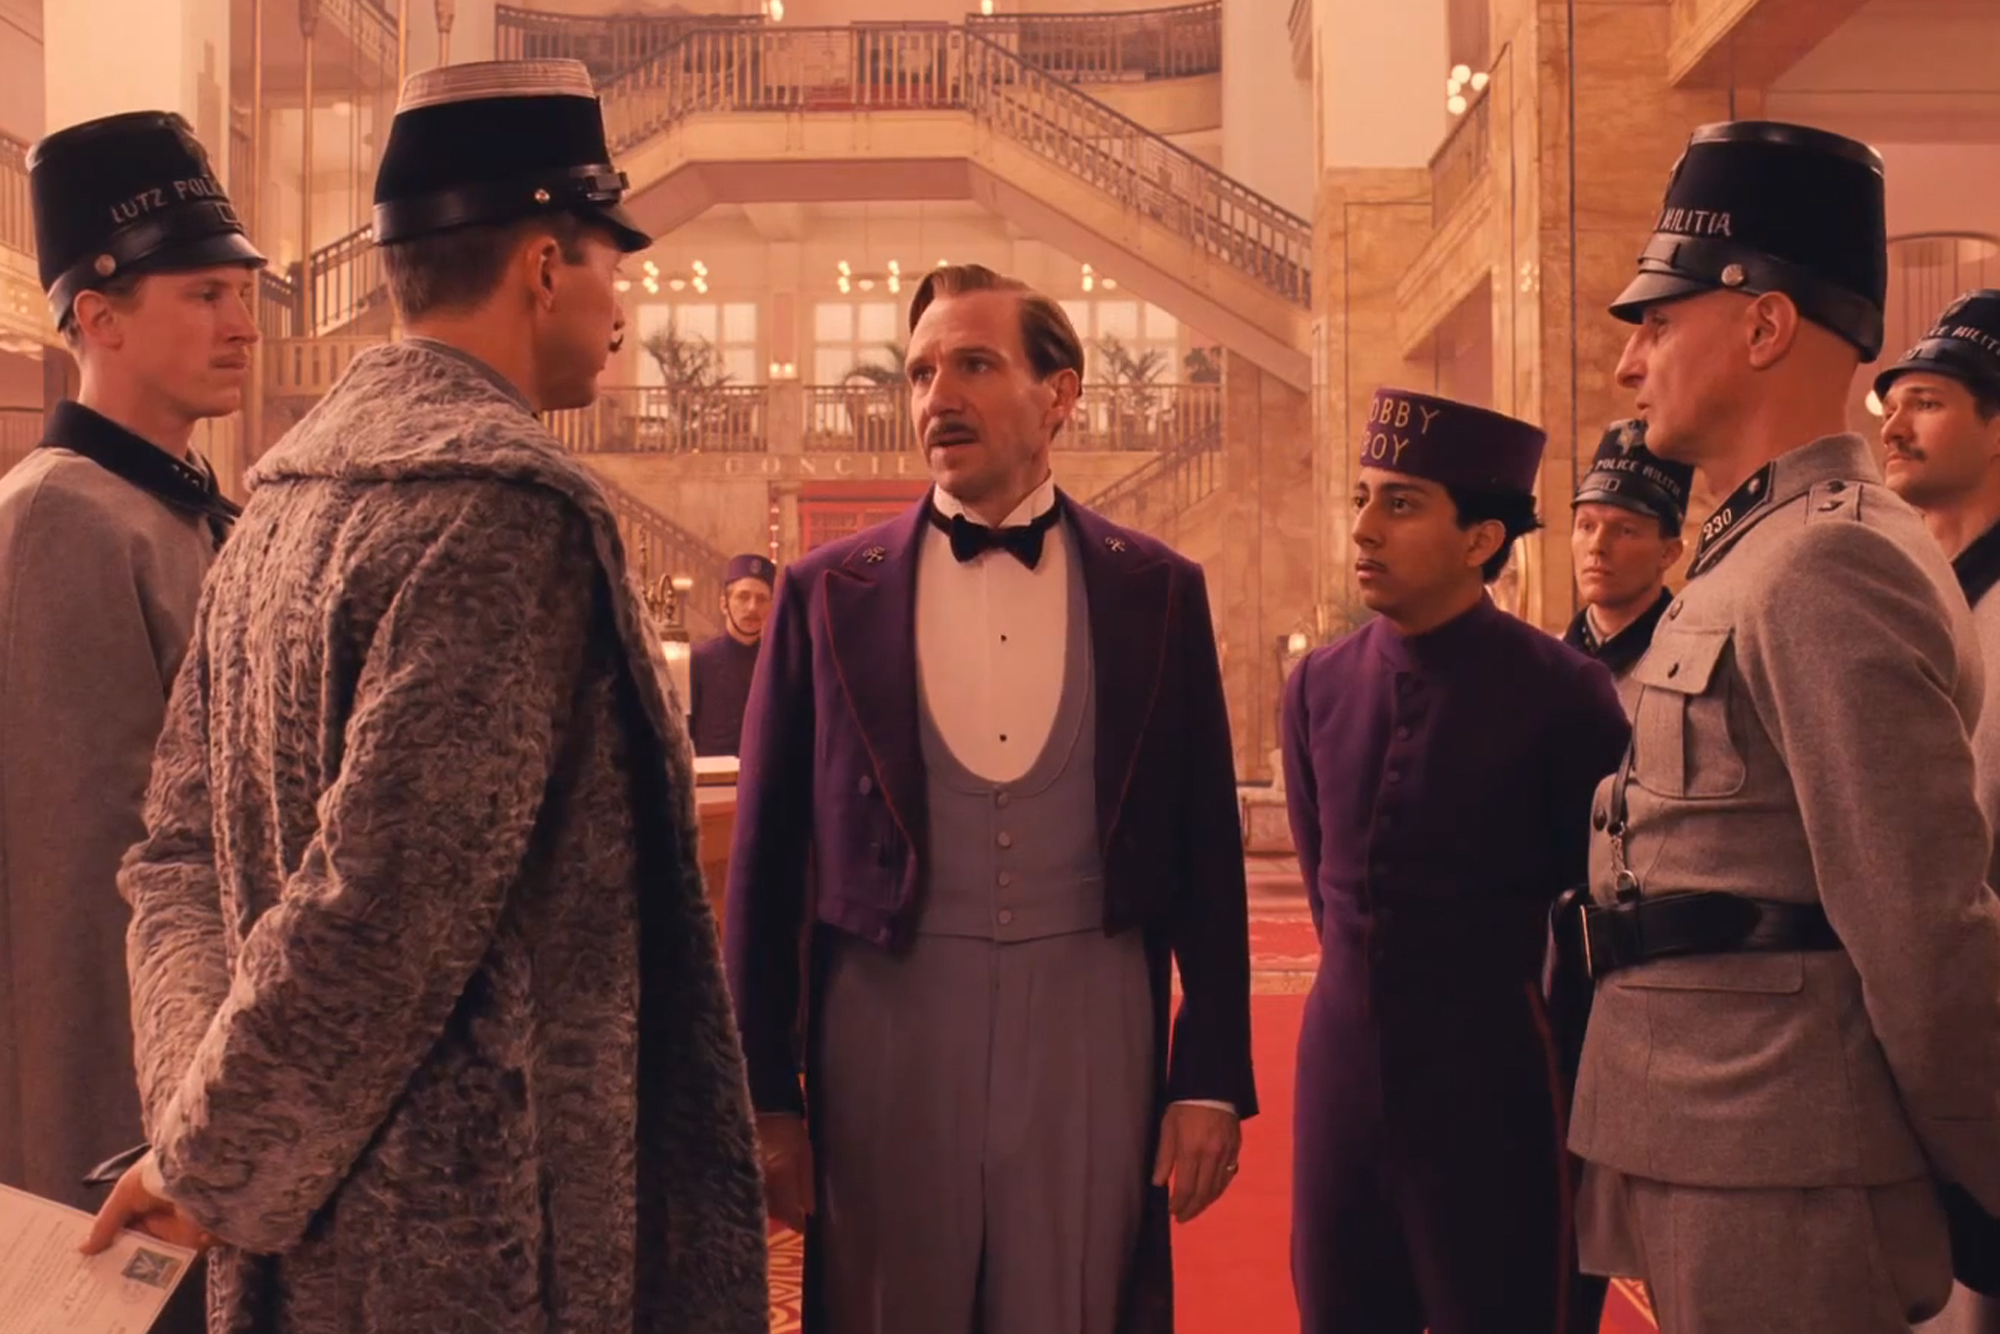 Review: ‘Grand Budapest Hotel’ is Wes Anderson’s Return to Being Wes Anderson